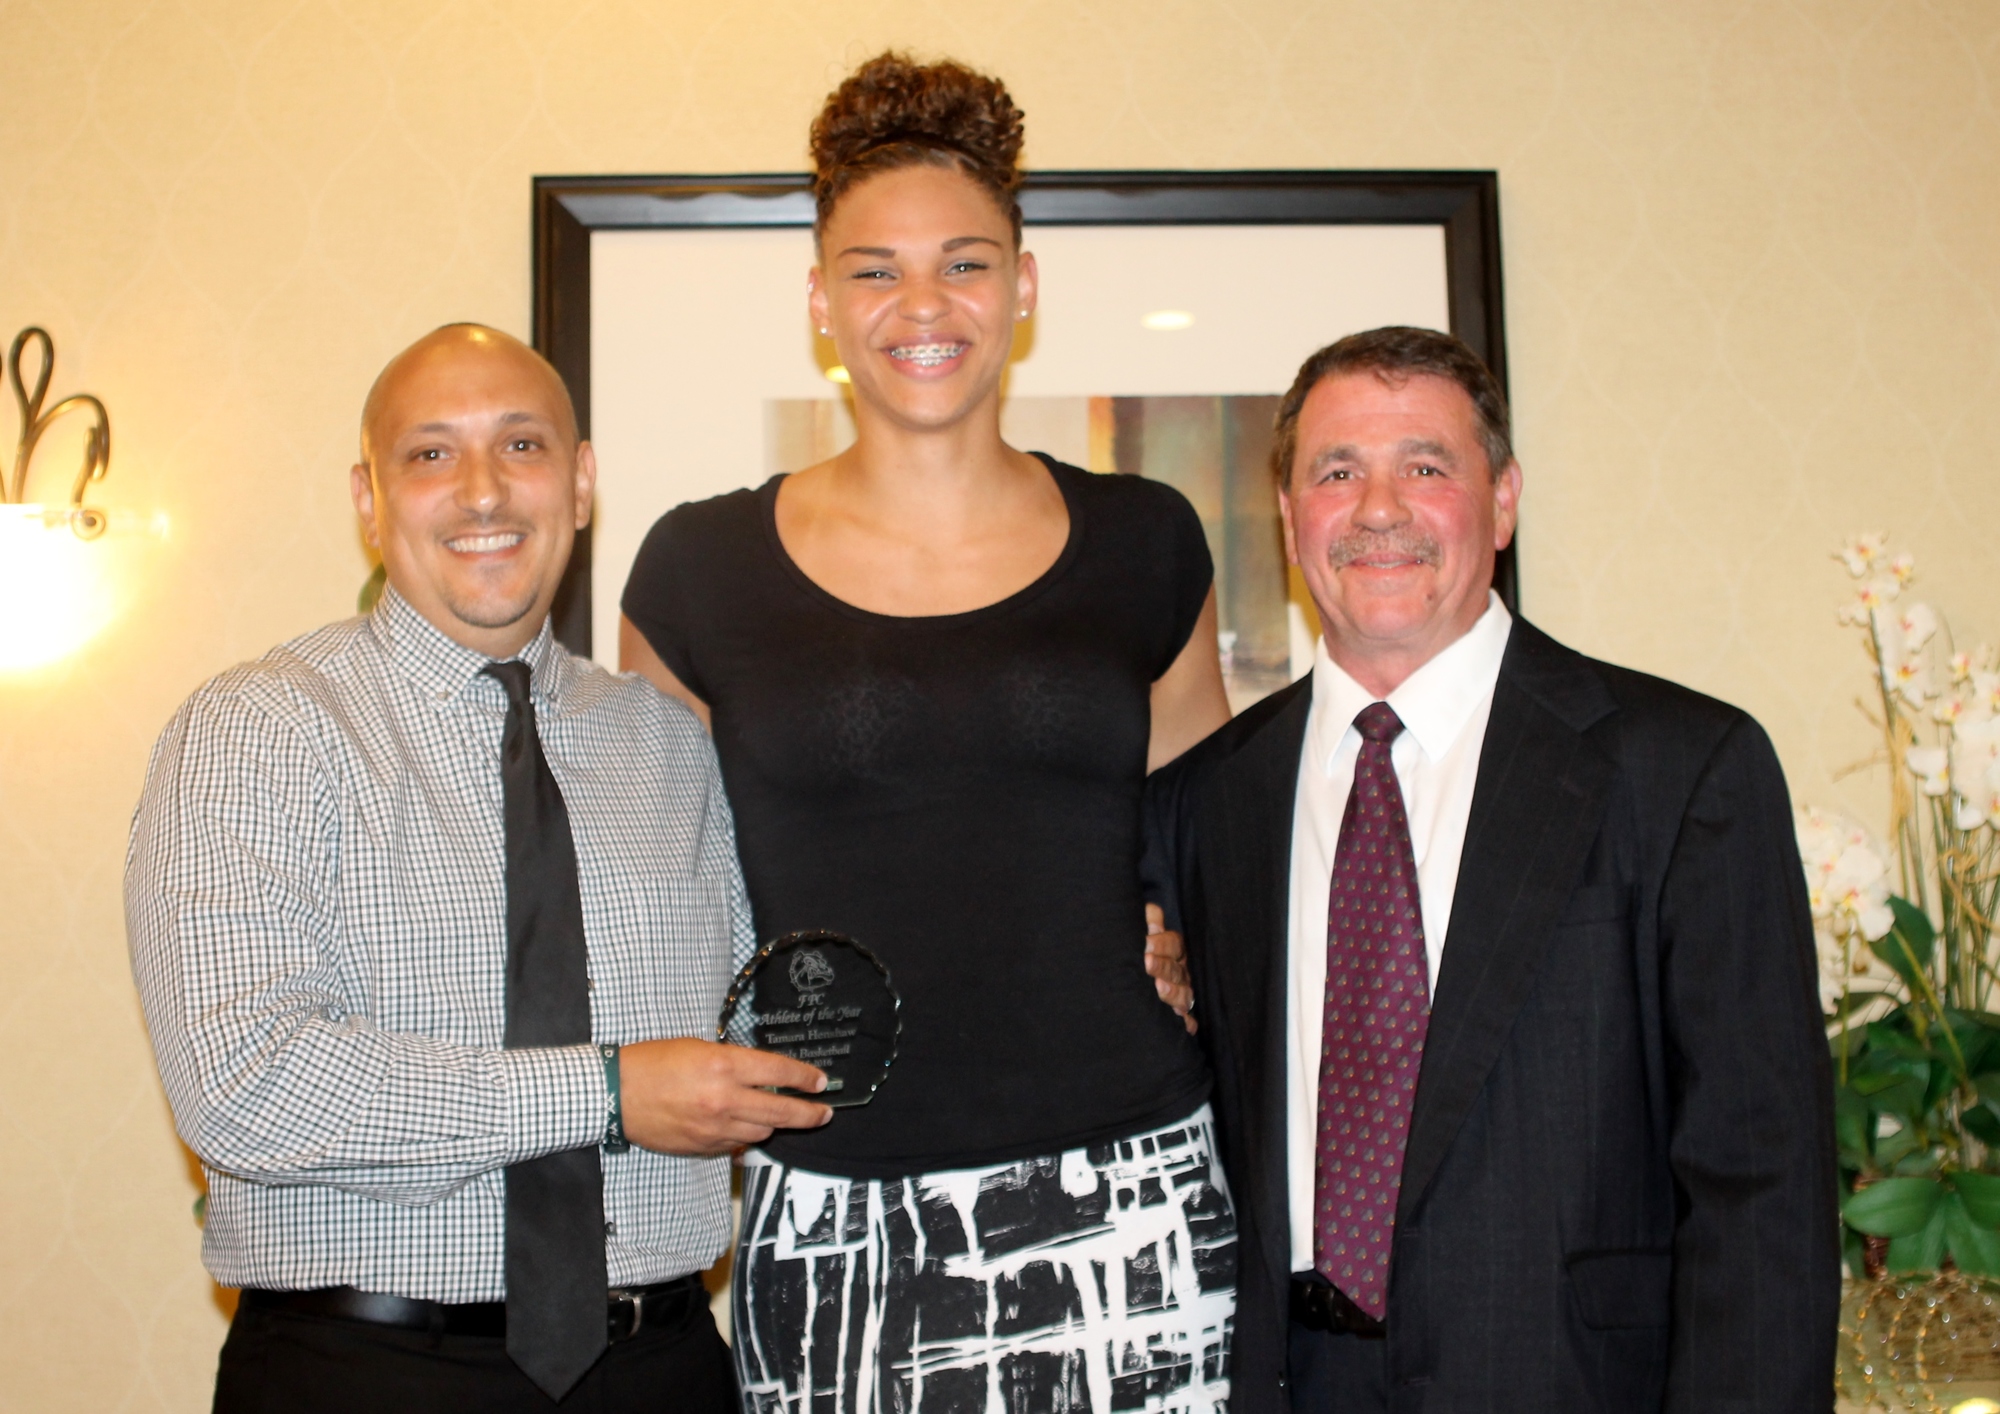 Tamara Henshaw, pictured with coach Javier Bevacqua and DeAugustino